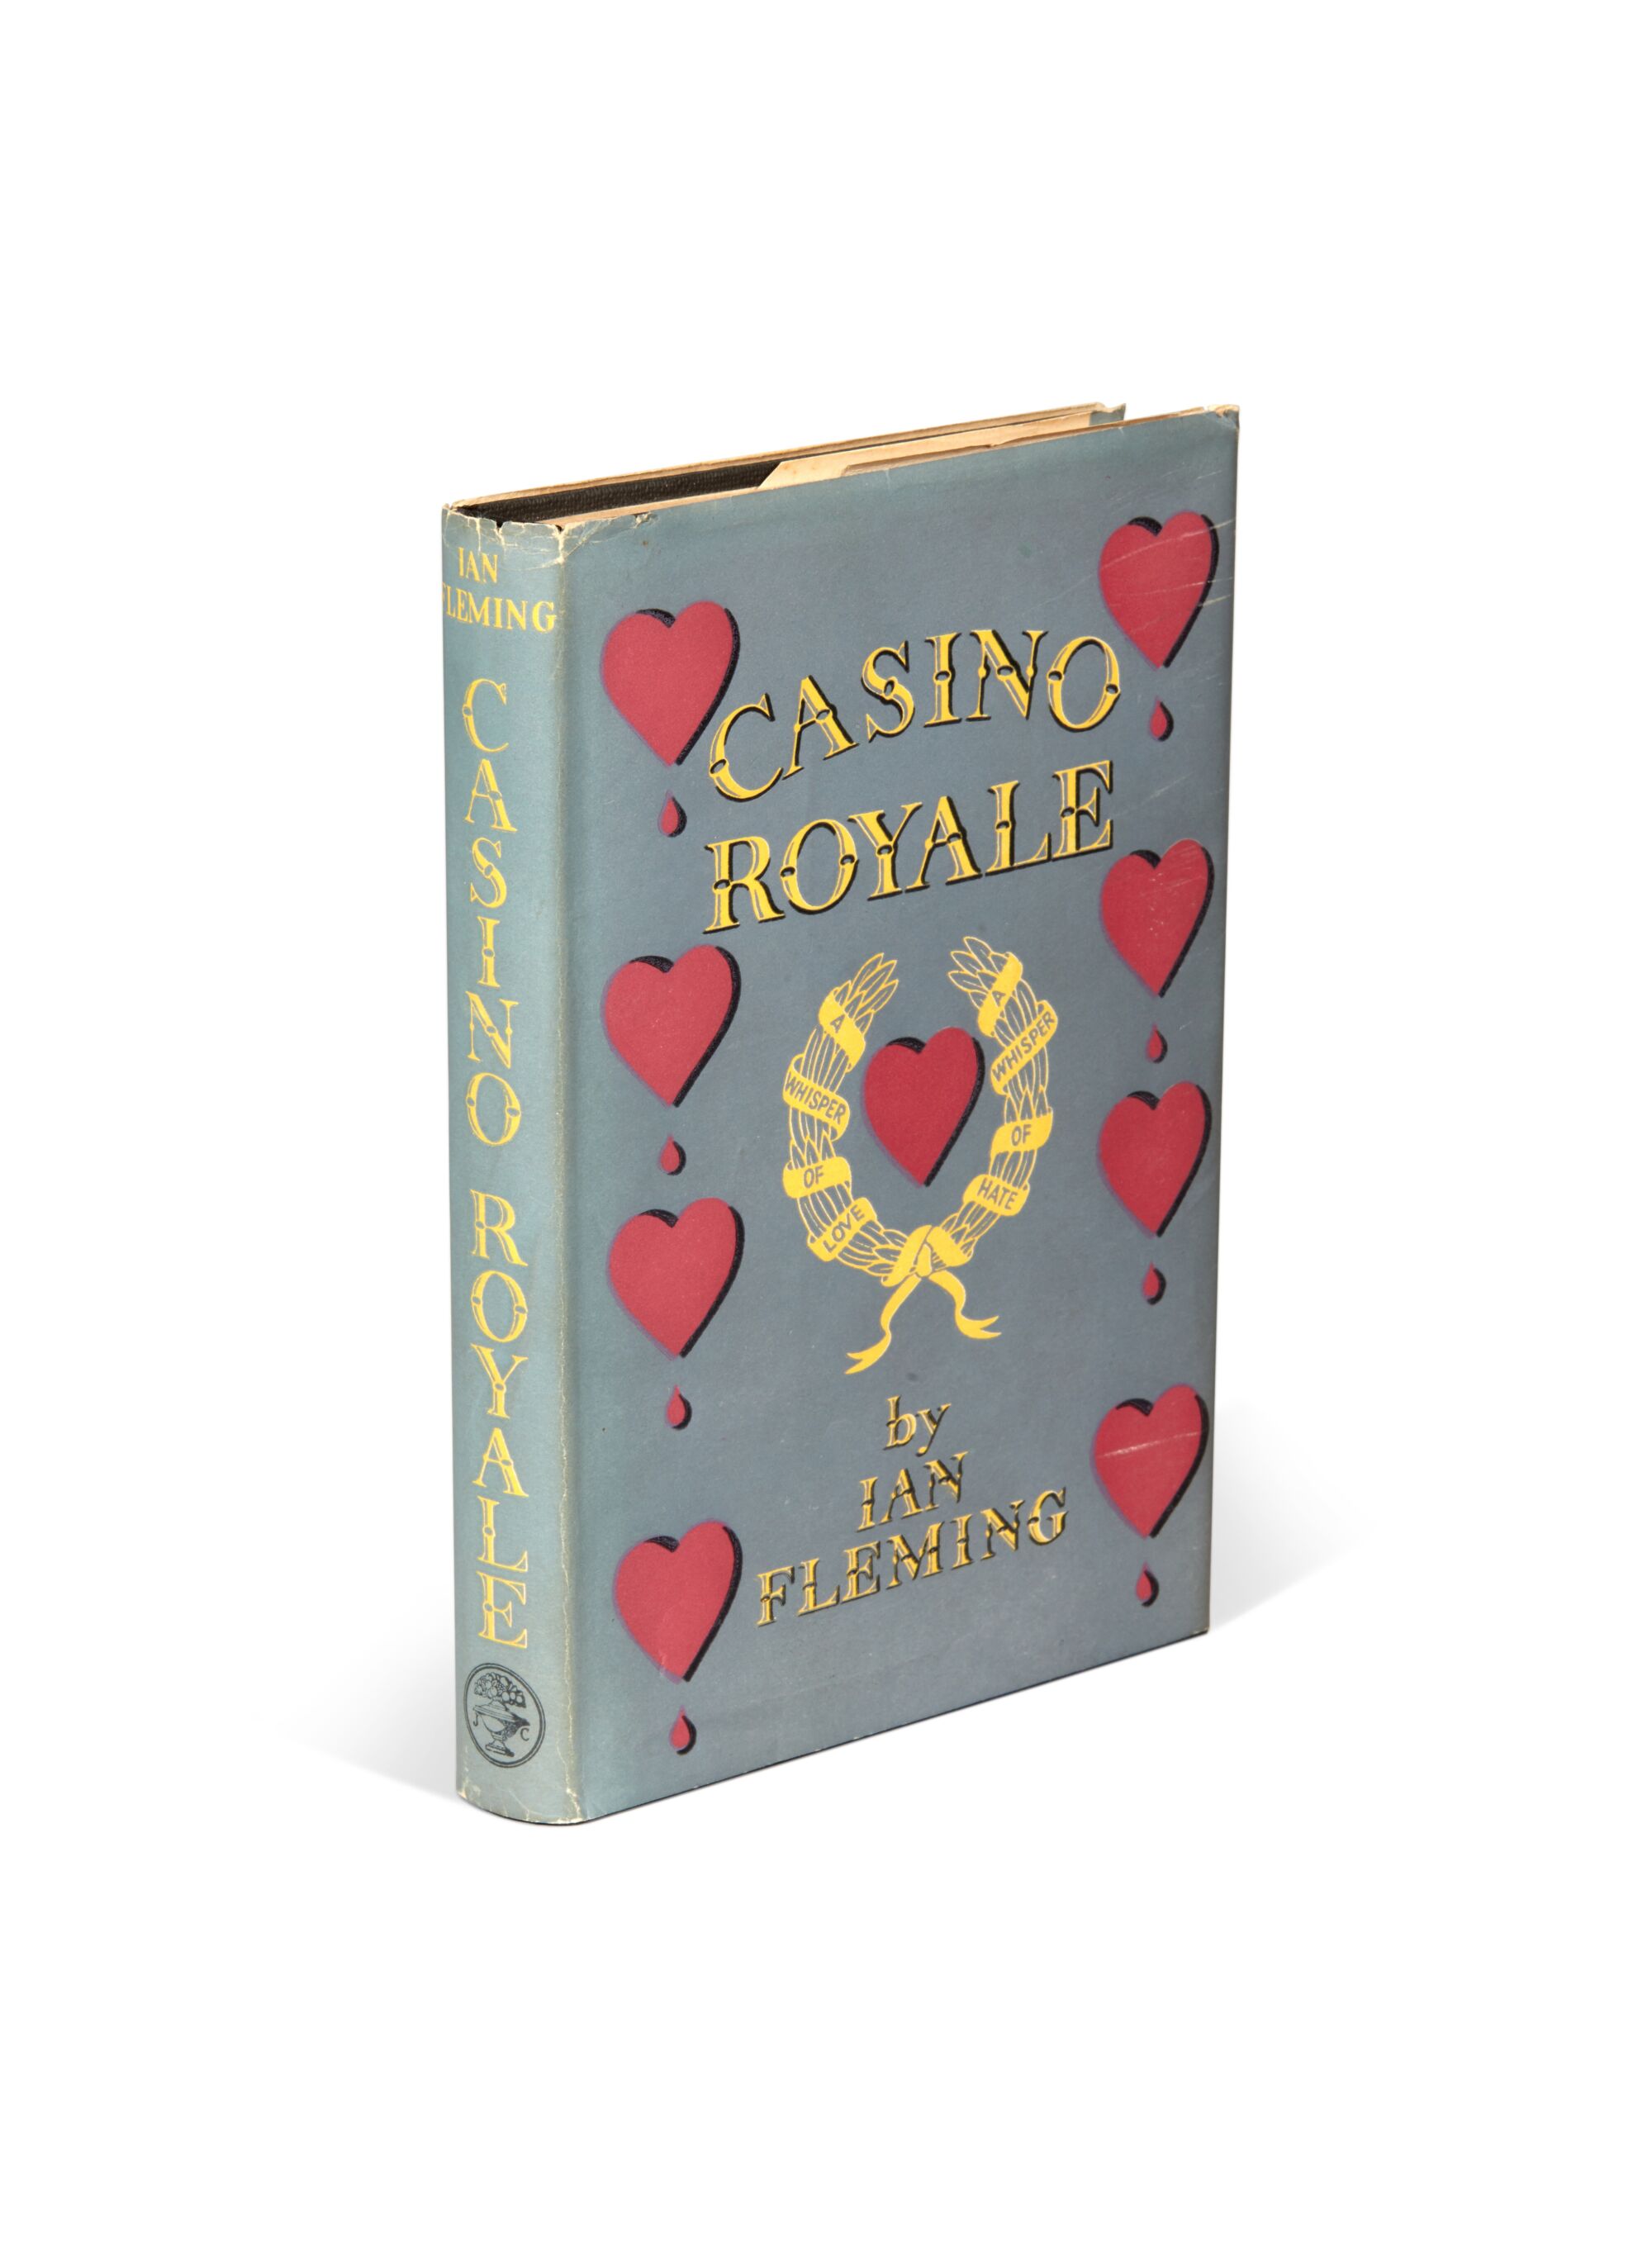 The Wick - Casino Royale by Ian Fleming first edition, Estimate £8,000 - £12,000